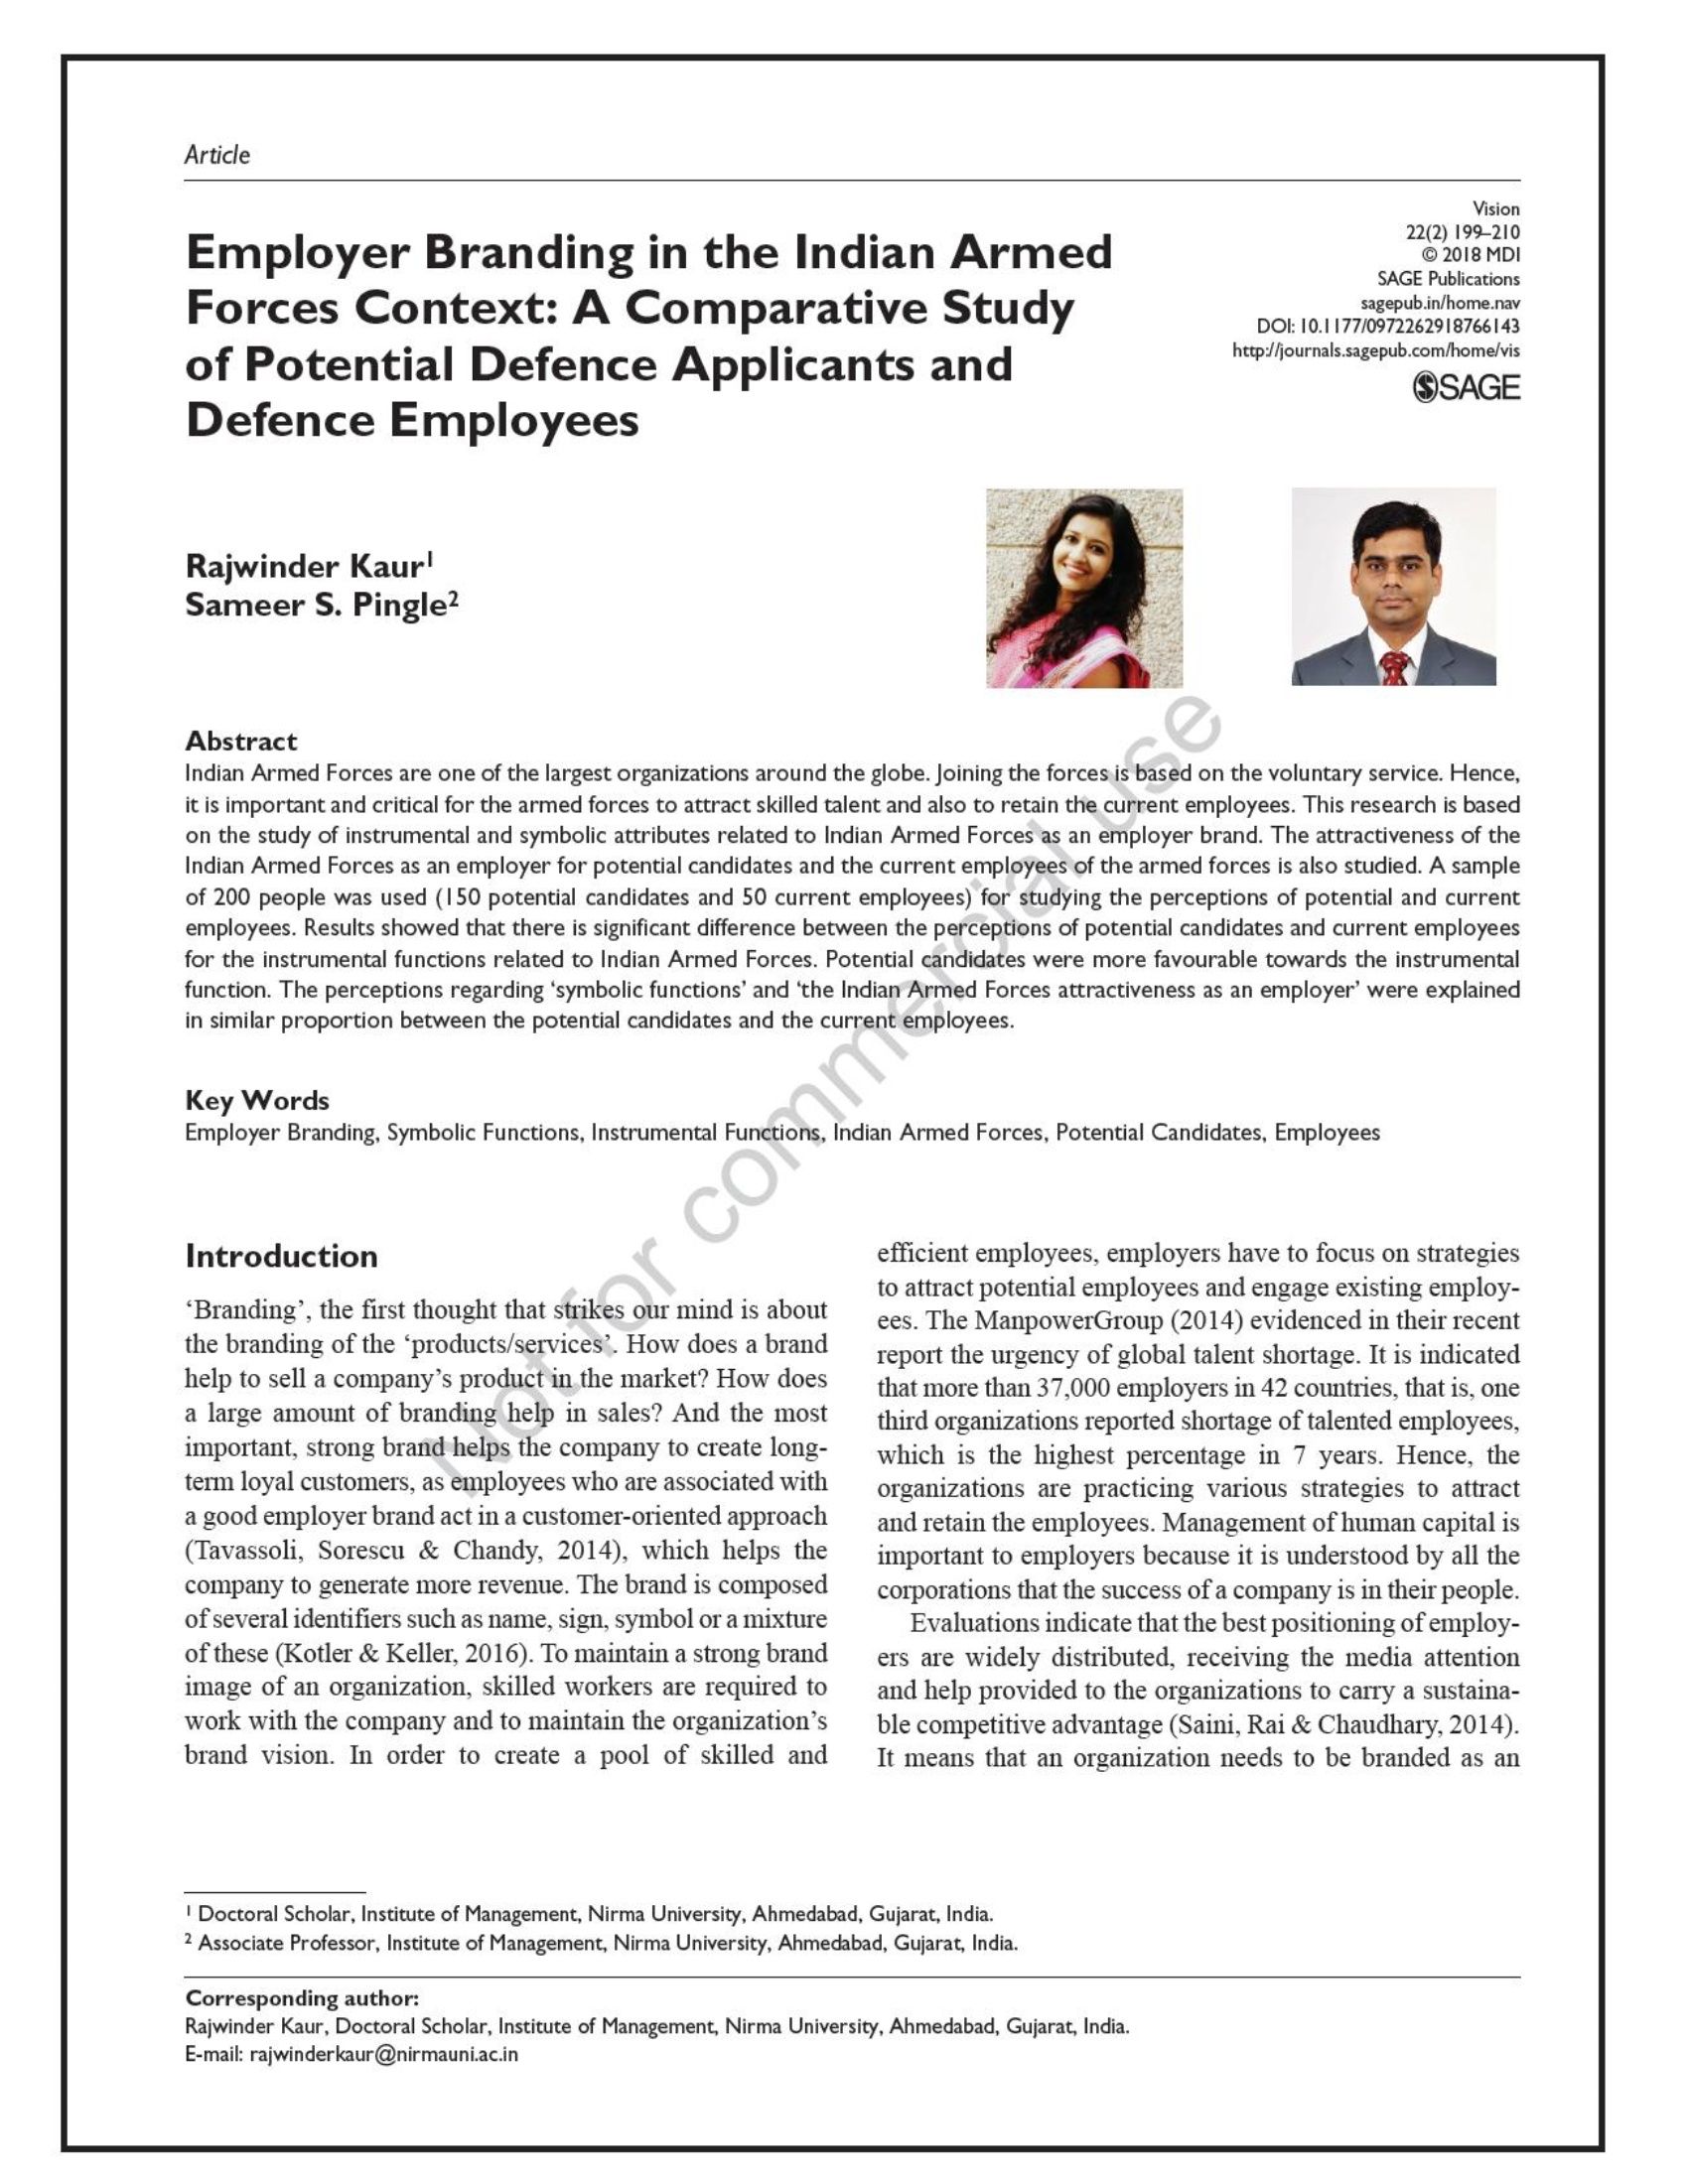 Employer Branding in the Indian Armed Forces Context: A Comparative Study of Potential Defence Applicants and Defence Employees